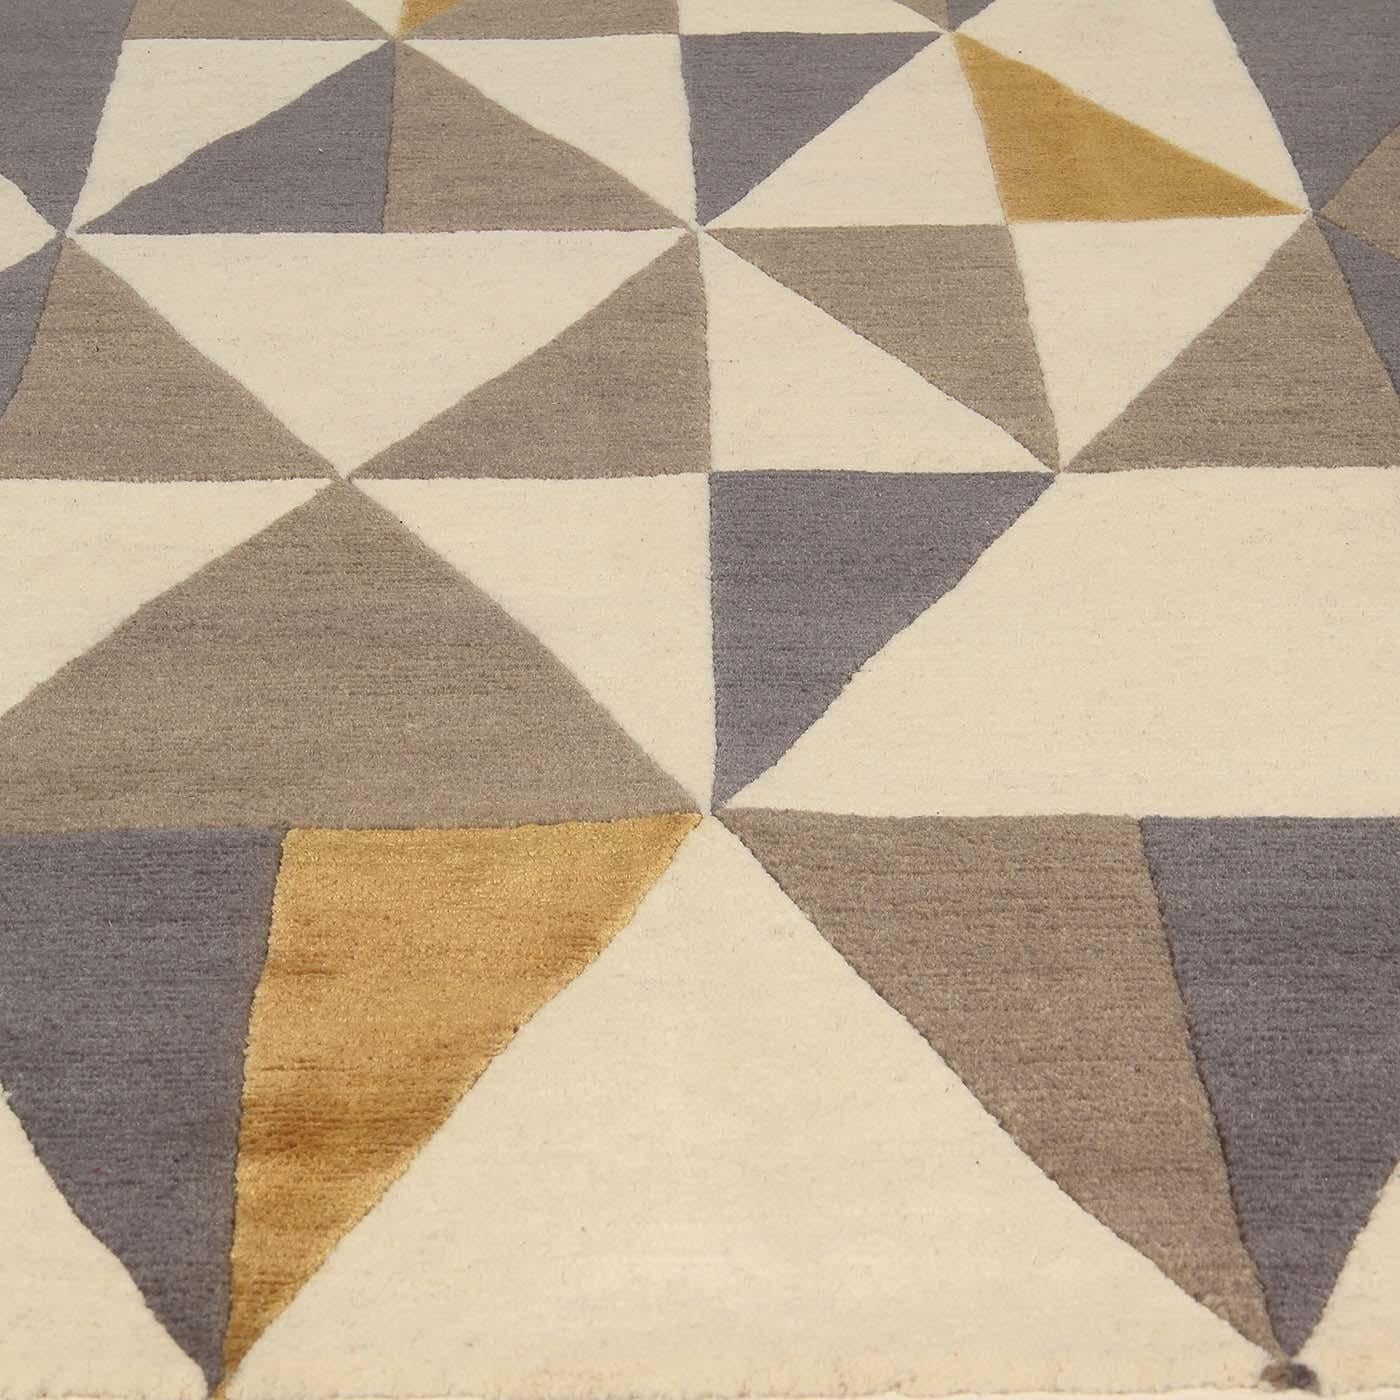 A sequence of triangles that turn into diamonds, thence to squares and rectangles displaying soft hues and slender shapes embellished with powerful colorful accents. From the original design of Gio Ponti, this Diamantina carpet's decoration